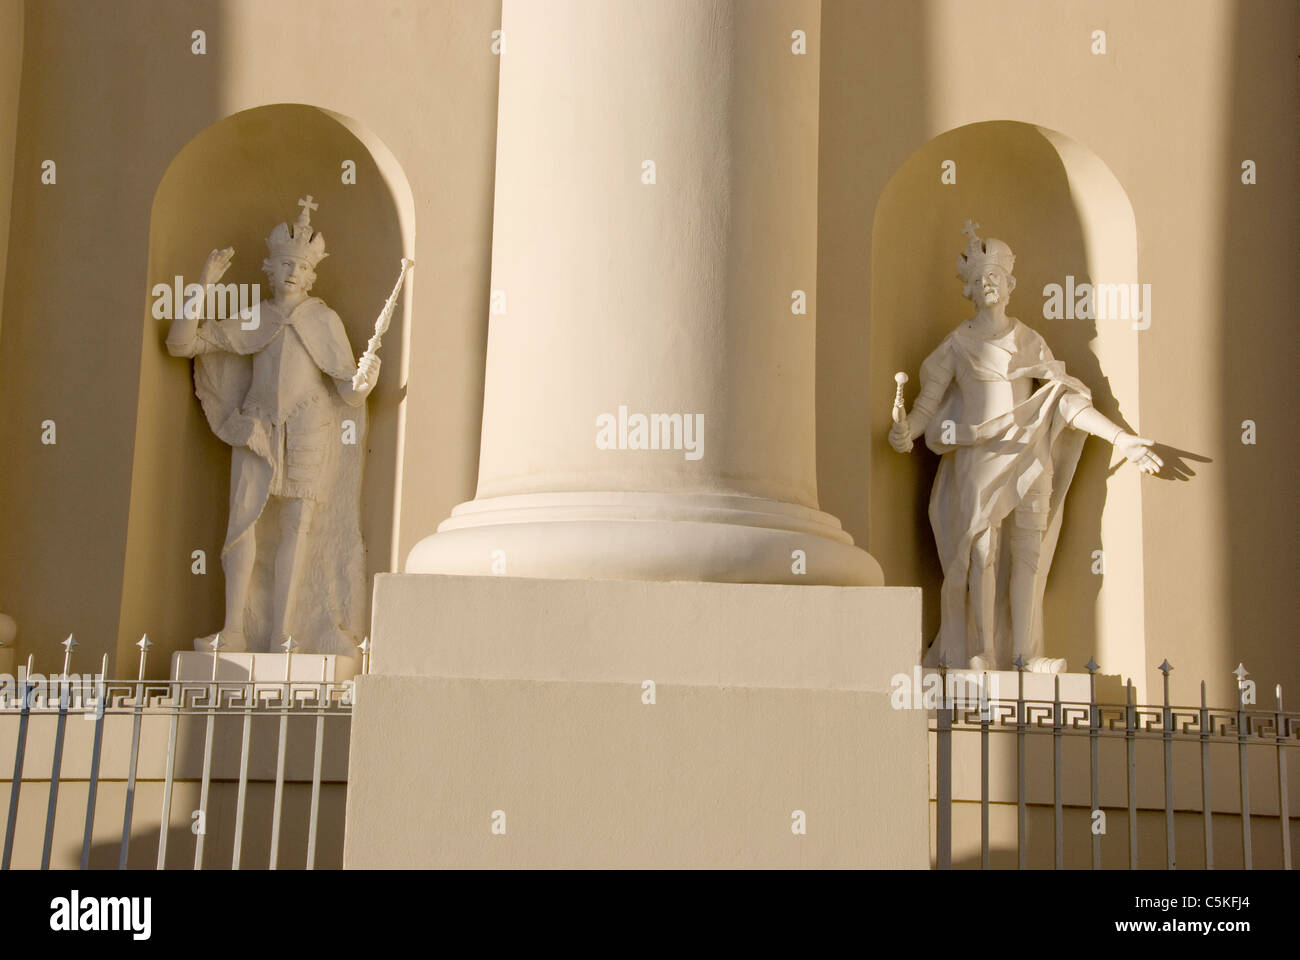 Statues of saints in the cathedral wall arks. Religous view. Stock Photo